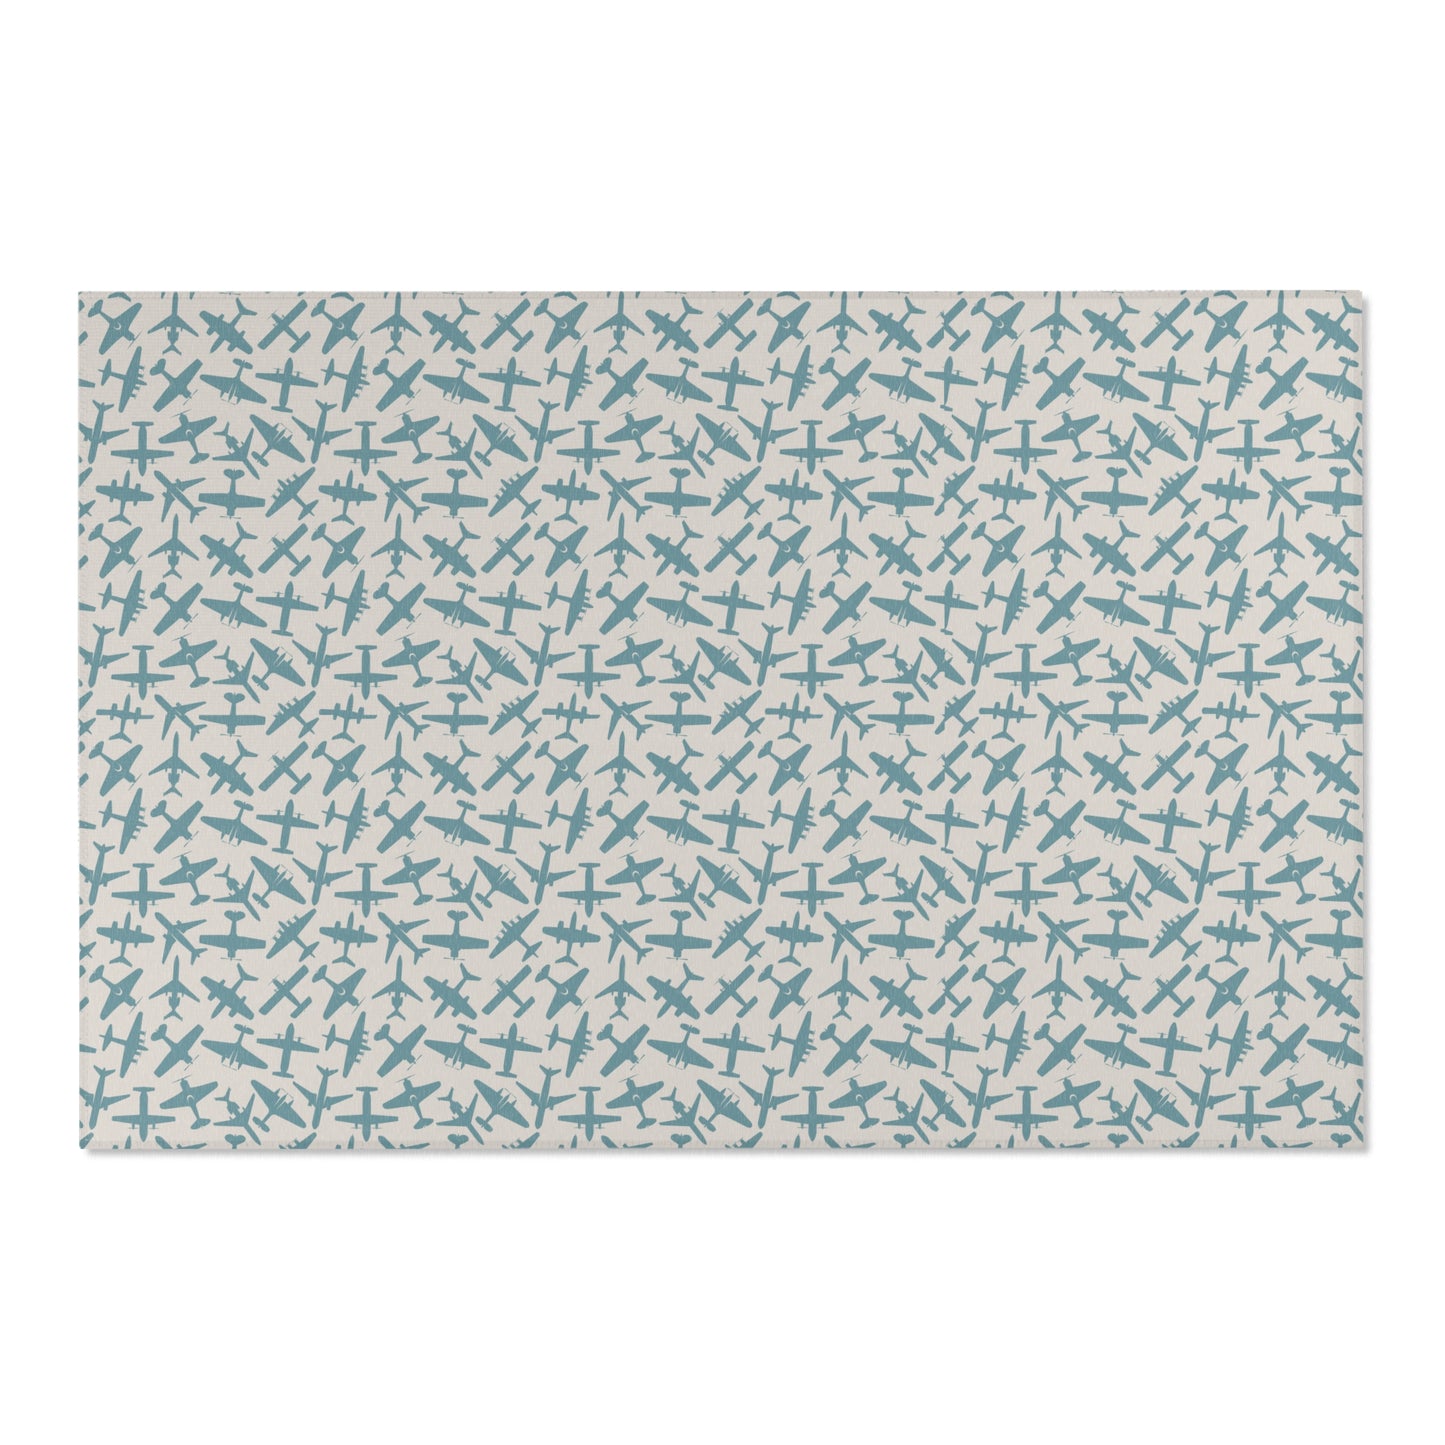 aviation merchandise, airplane patterned aviation area rug 5